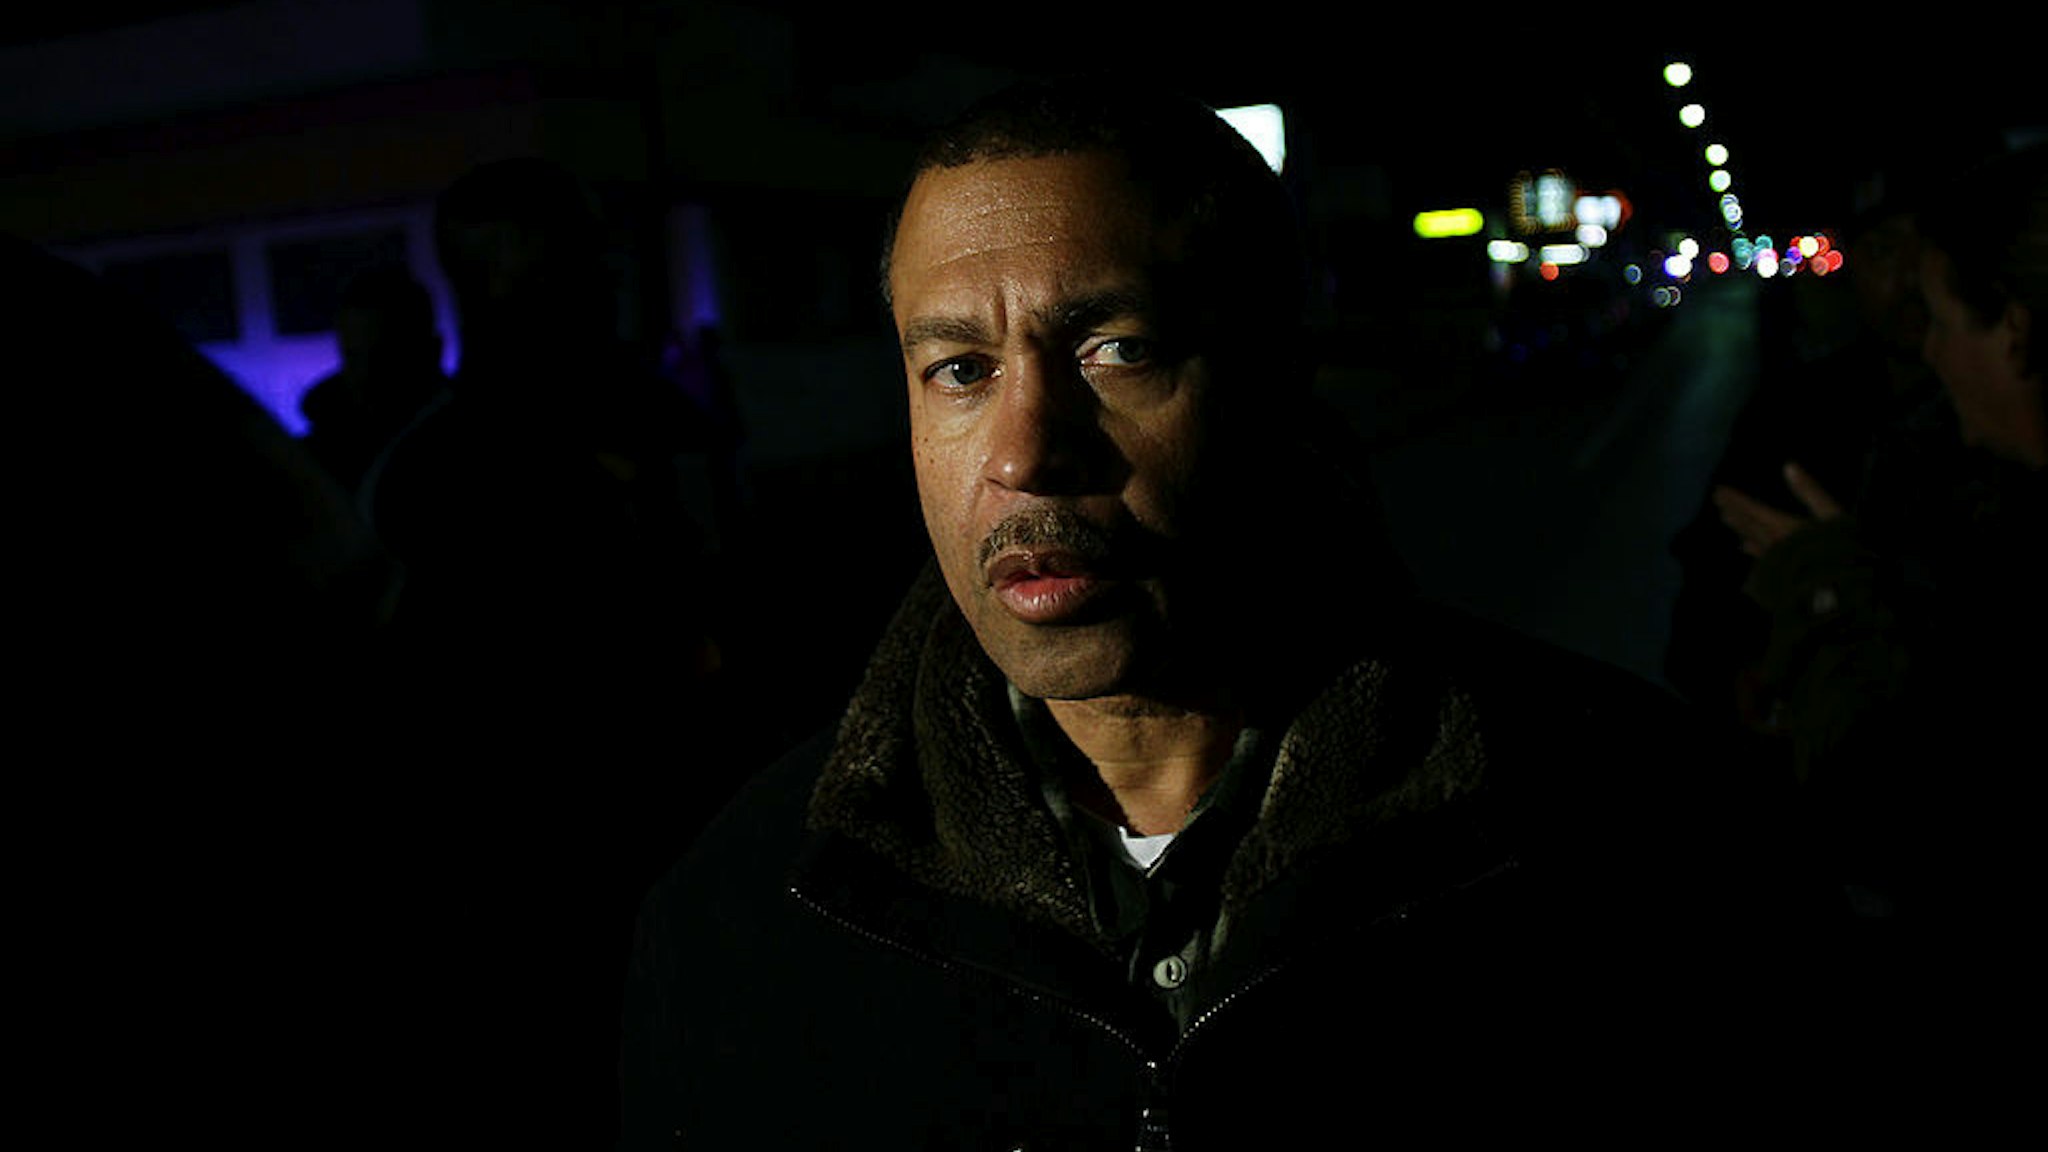 DETROIT, MI - NOVEMBER 06: Detroit Police Chief James Craig talks to reporters about a shooting outside of a barber shop where nine people were shot November 6, 2013 in Detroit, Michigan. Chief Craig confirmed that three people were killed and the suspects were still at large.